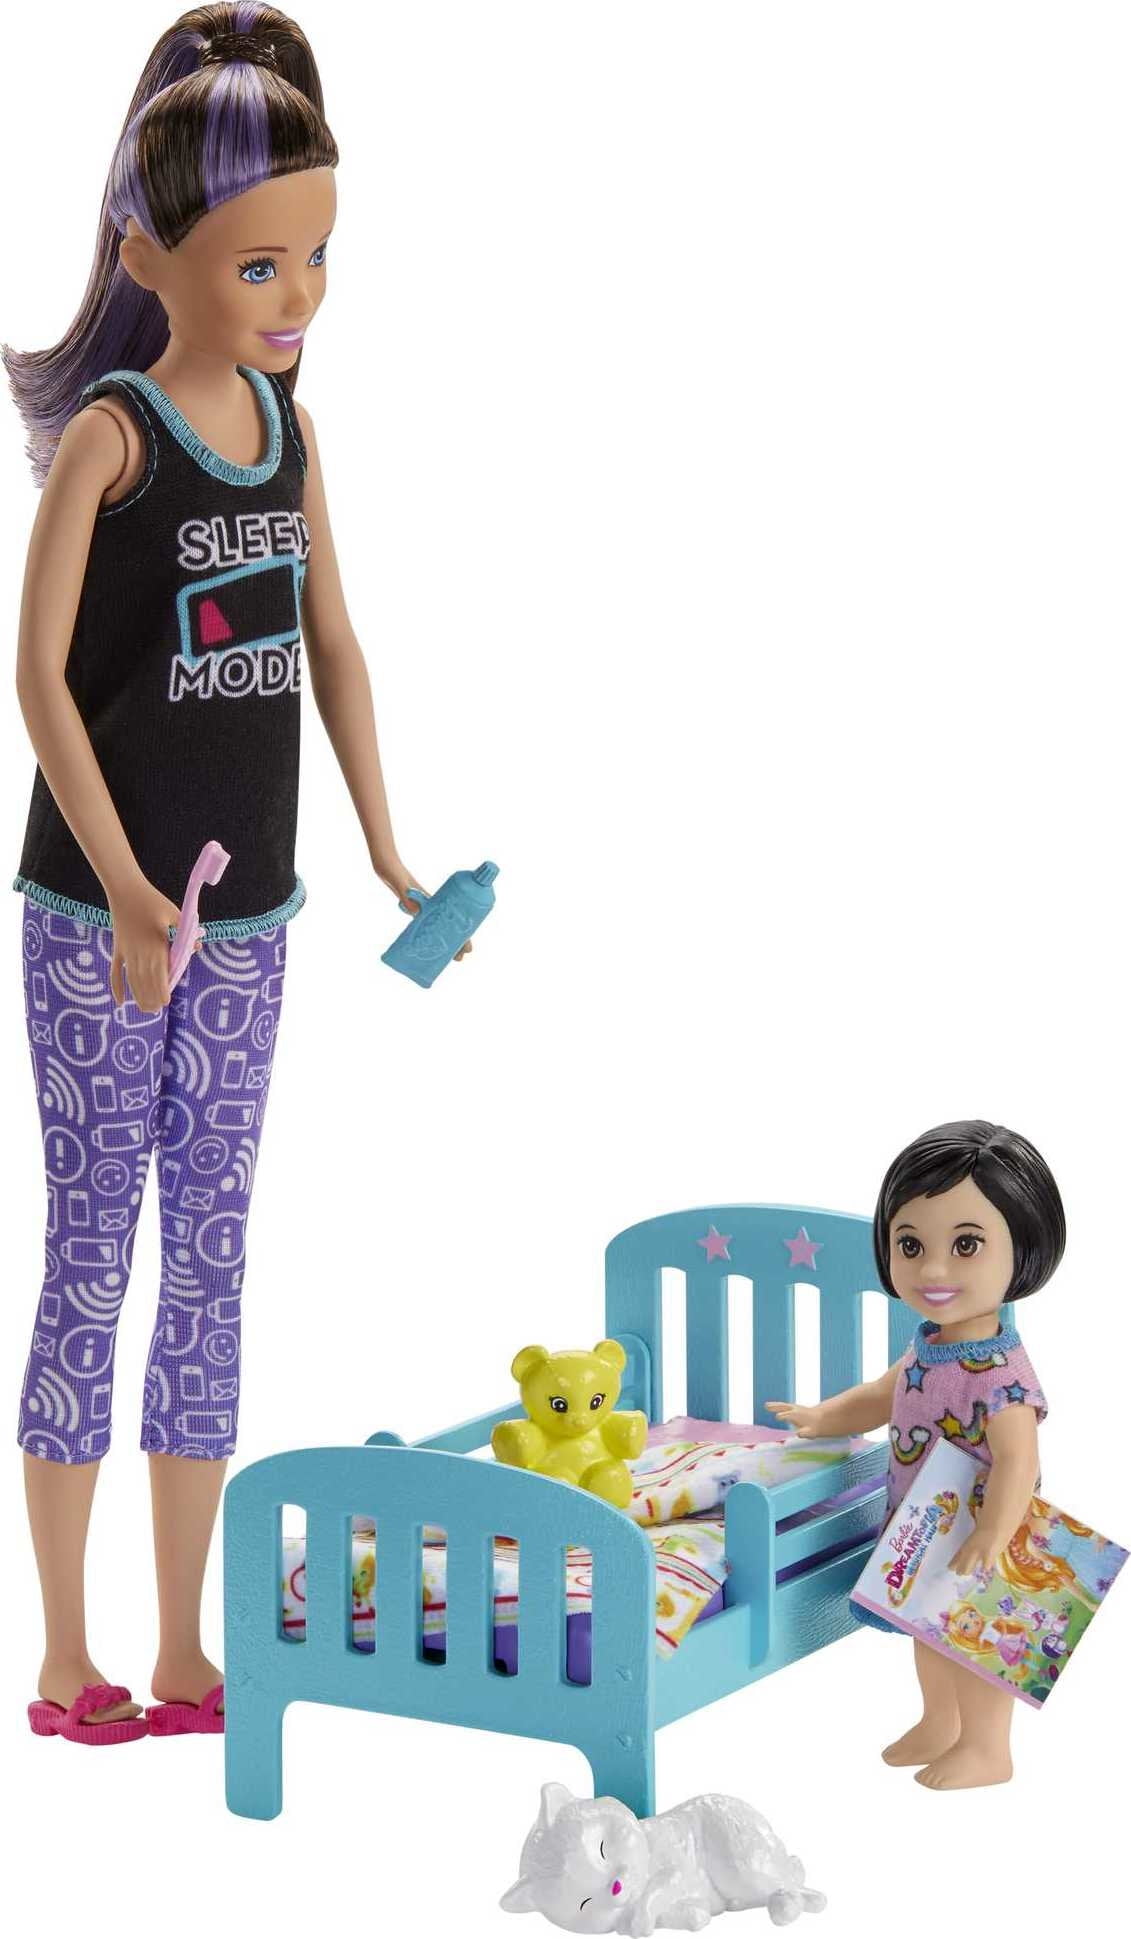 Feeding and Changing Playset with Color-Change Barbie Skipper Babysitters Inc